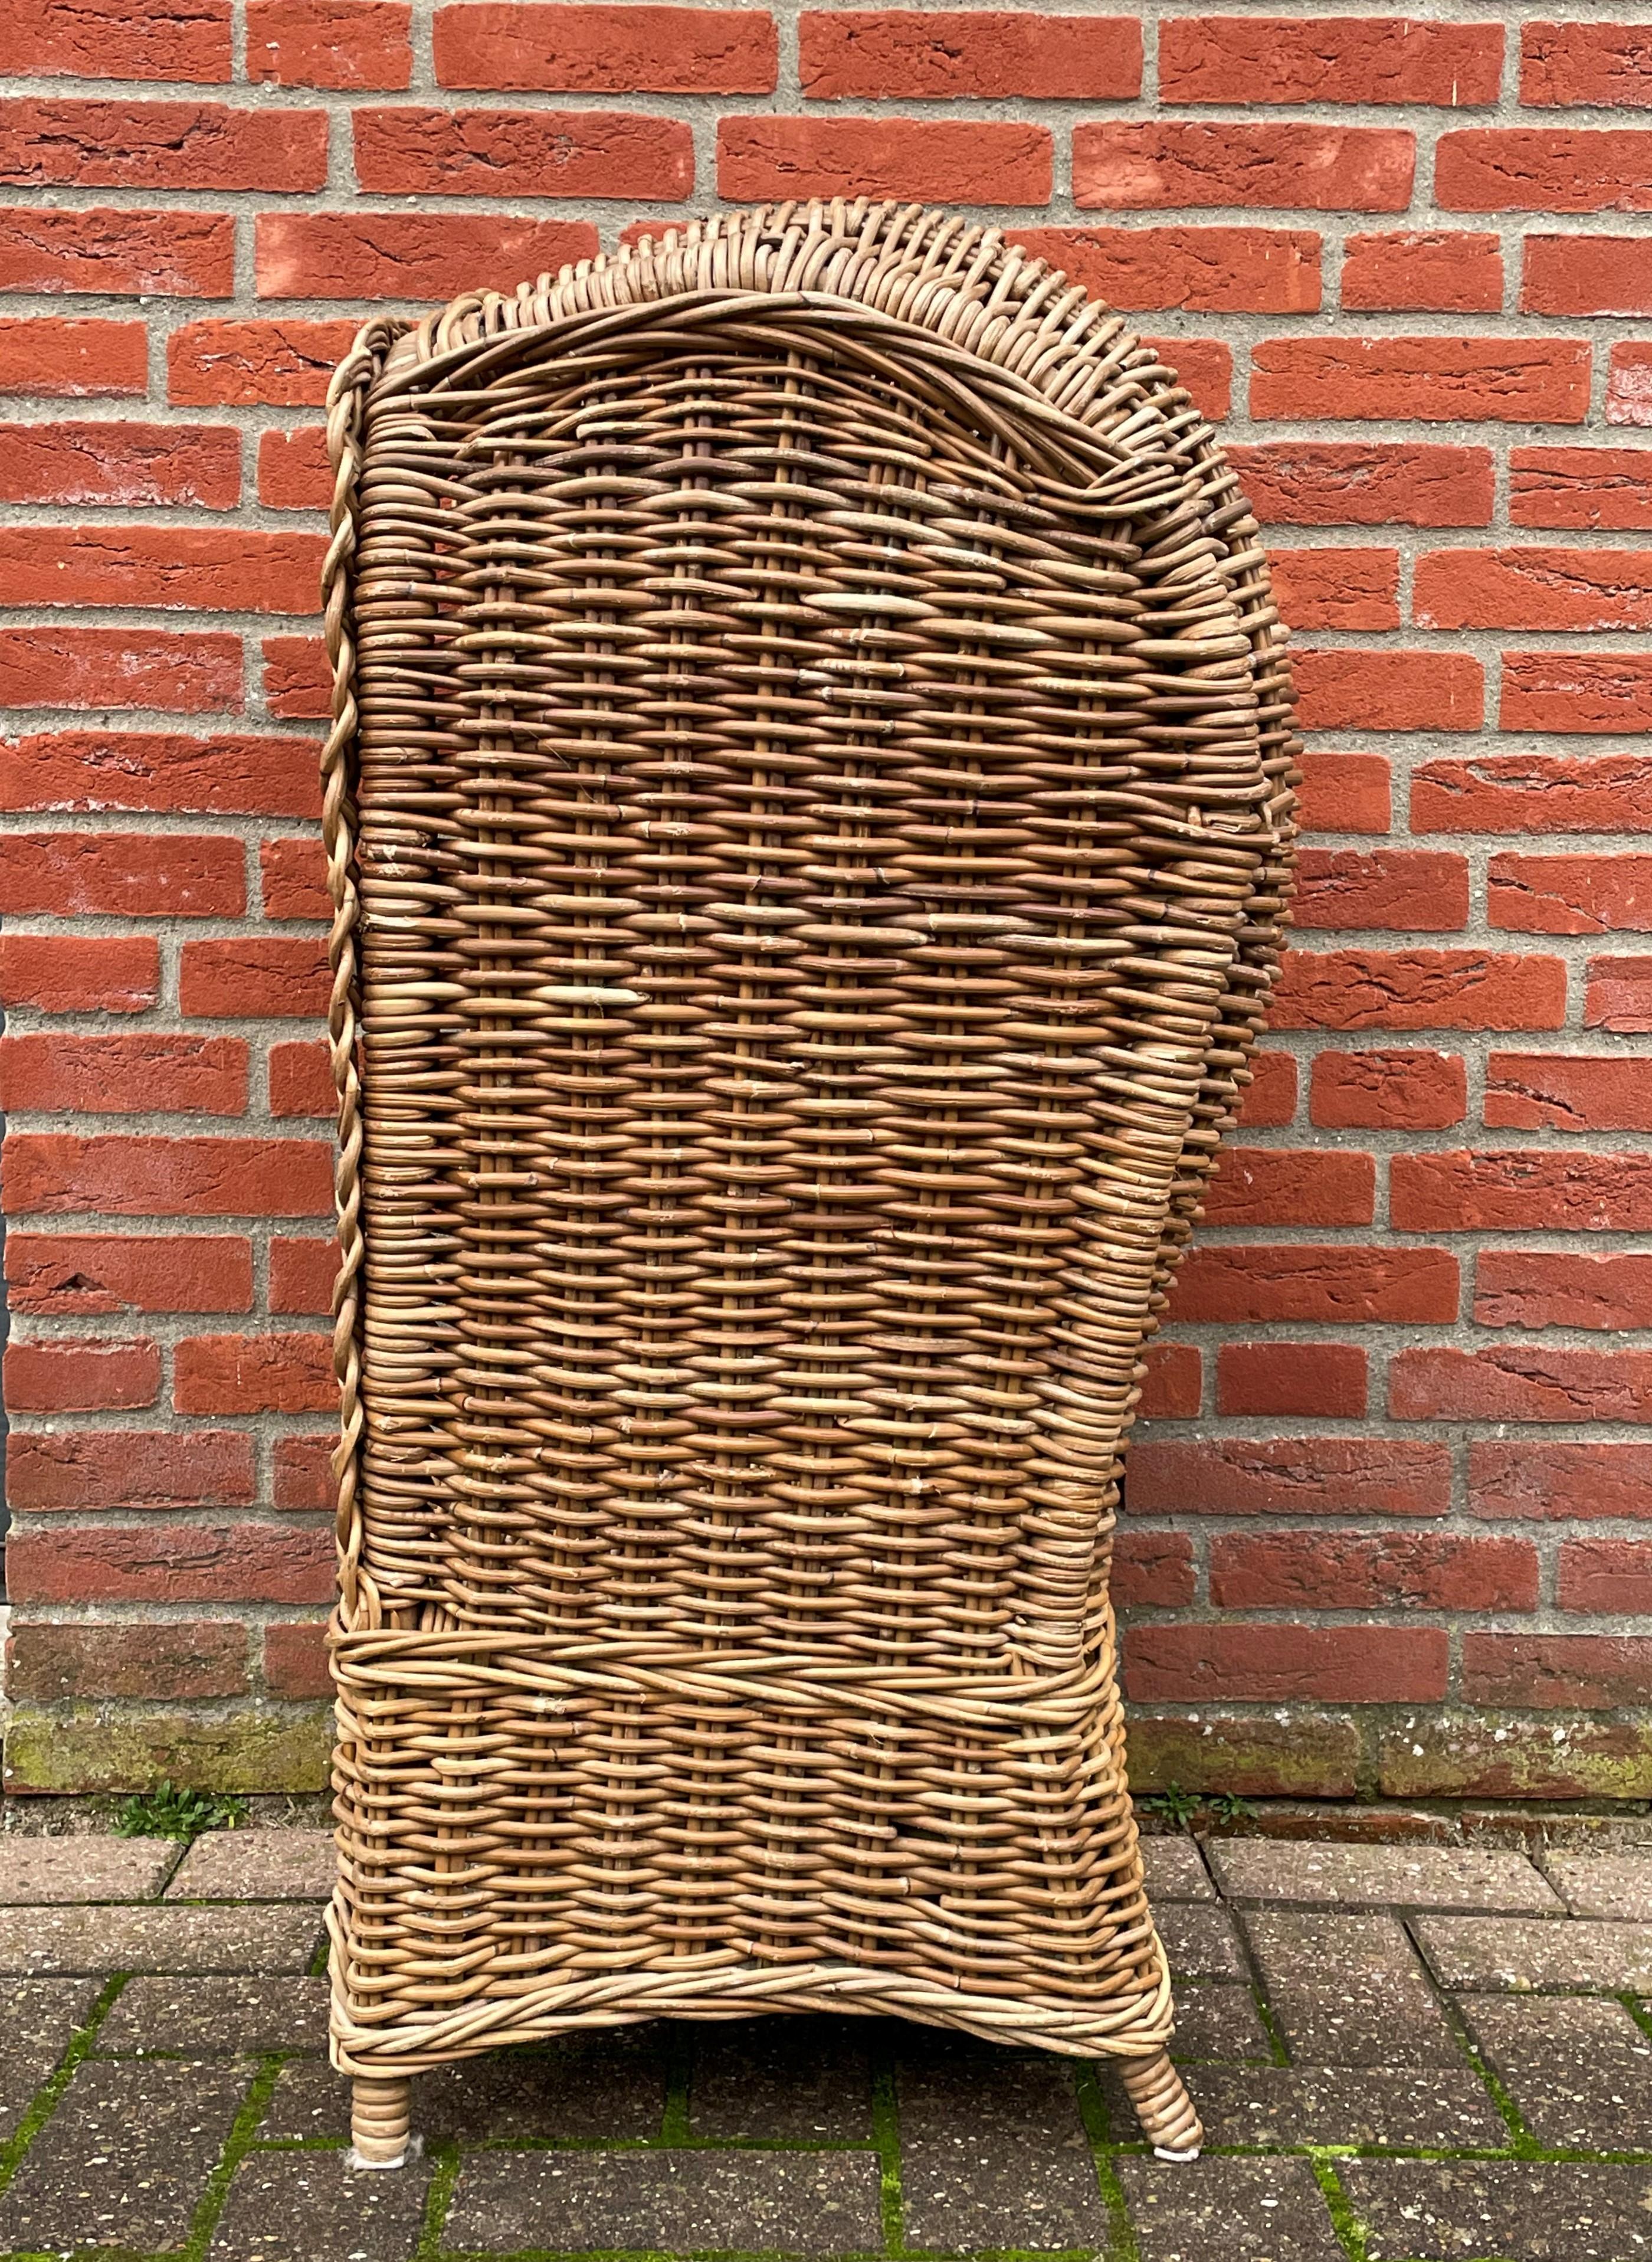 Bamboo Very Rare & Super Decorative Antique-Like Hand Woven Rattan Beach Chair for Kids For Sale